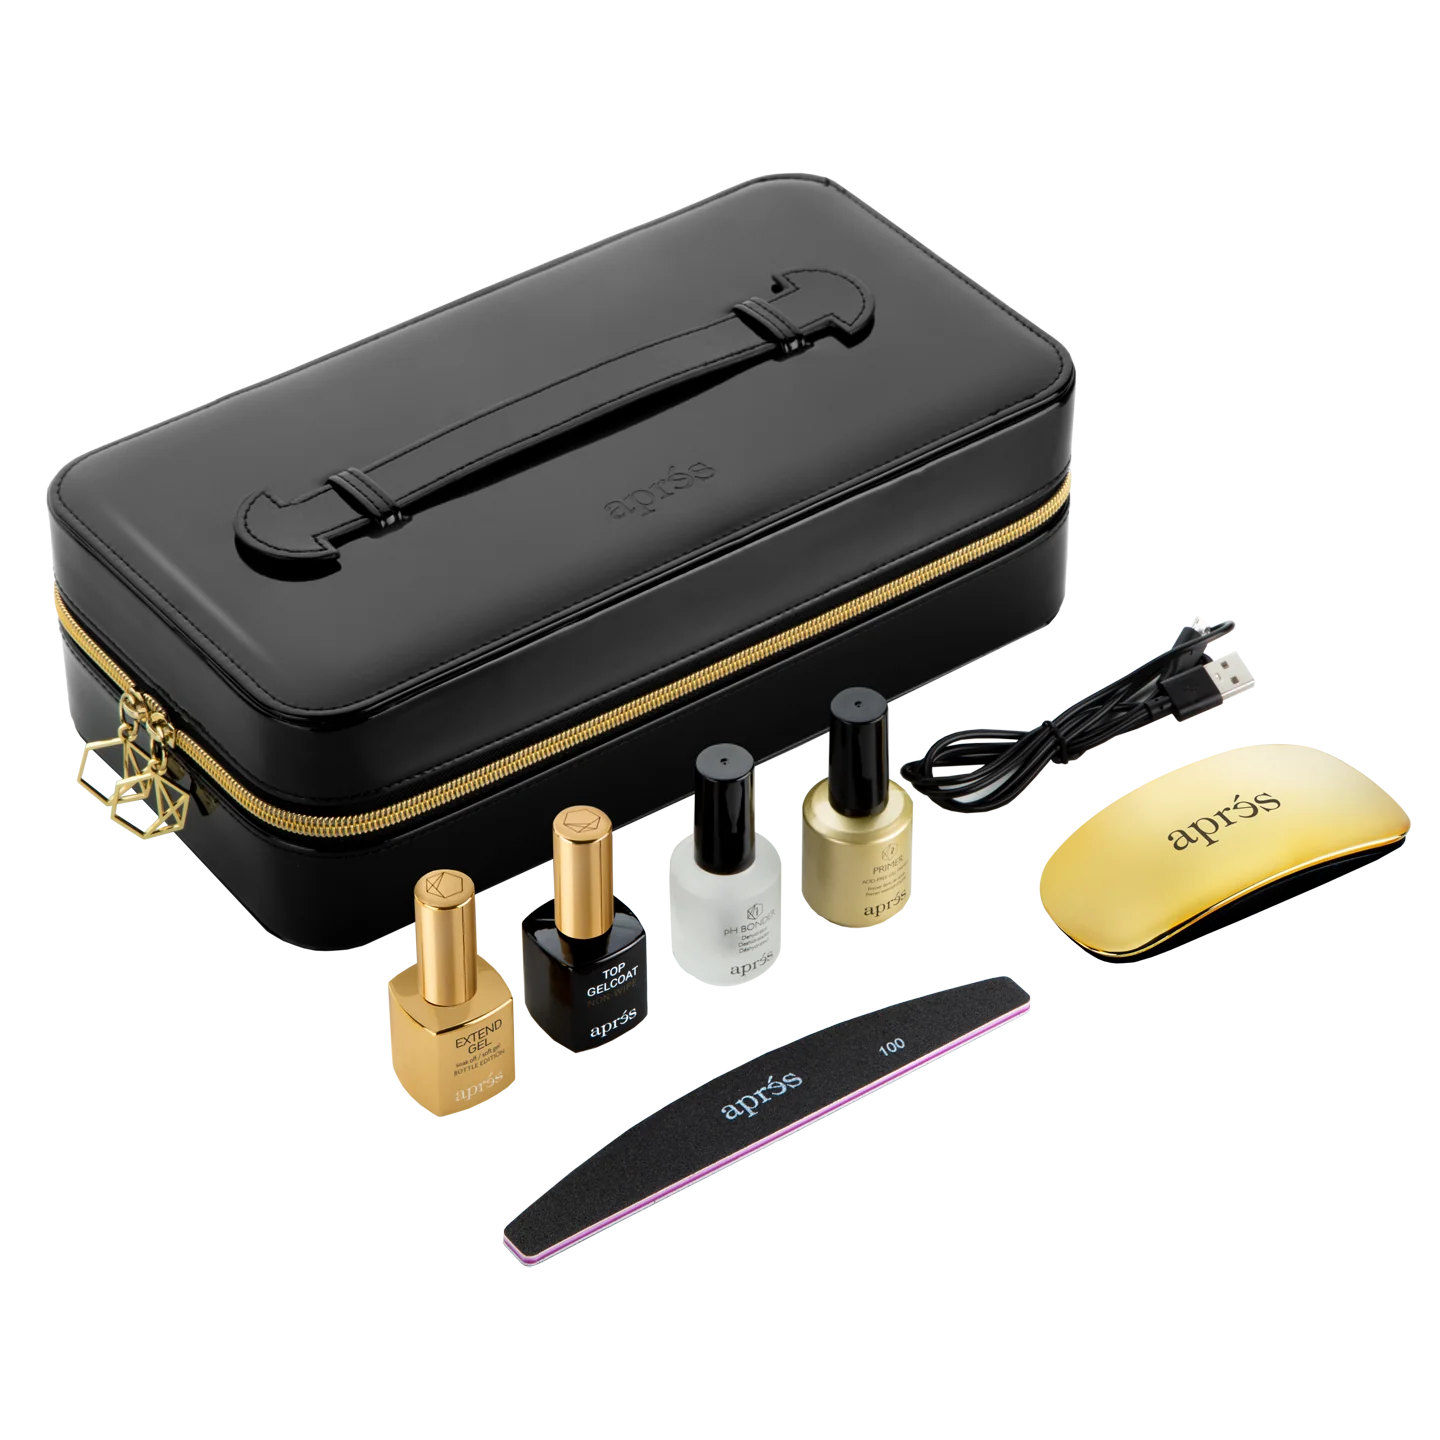 New Generation GEL-X Set (W/O Gel-X Tips) with patent leather case